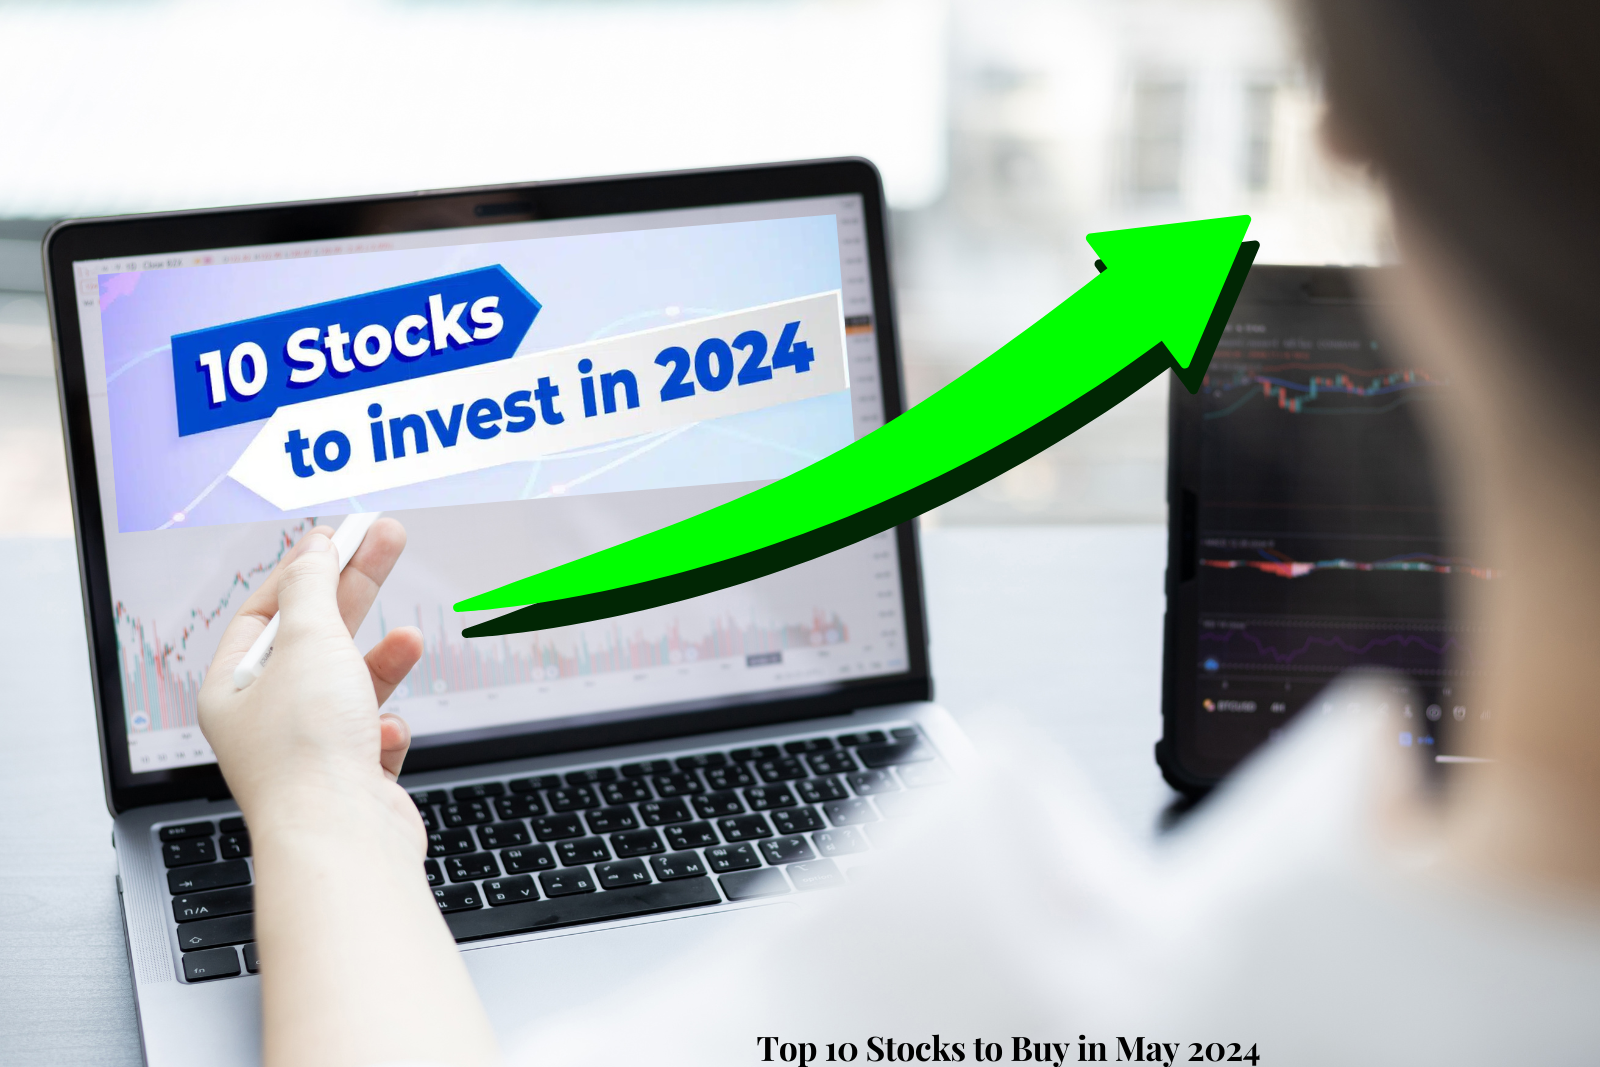 Top 10 Stocks to Buy in May 2024